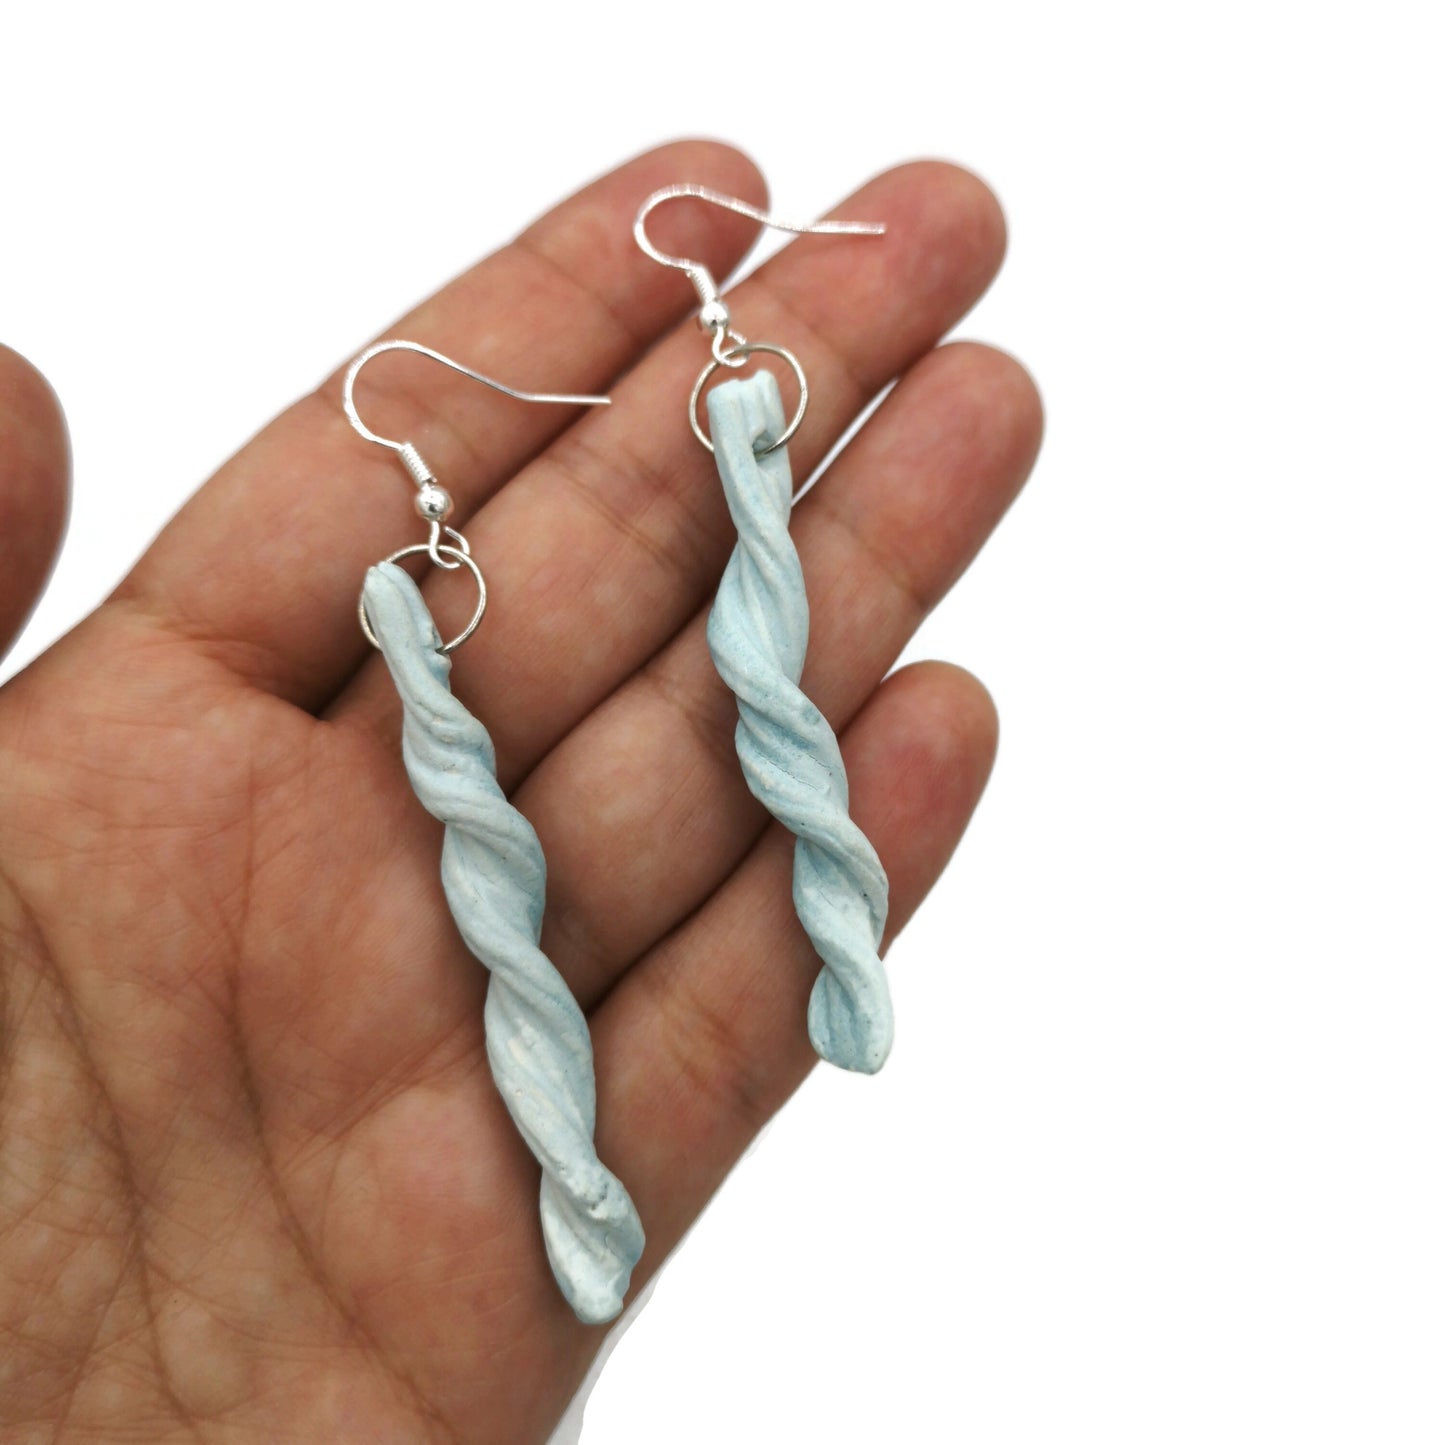 Handmade Ceramic Long Earrings Turquoise Blue With Sterling Silver Ear Wire, Boho Drop Earrings, 9th Anniversary Gift For Wife - Ceramica Ana Rafael